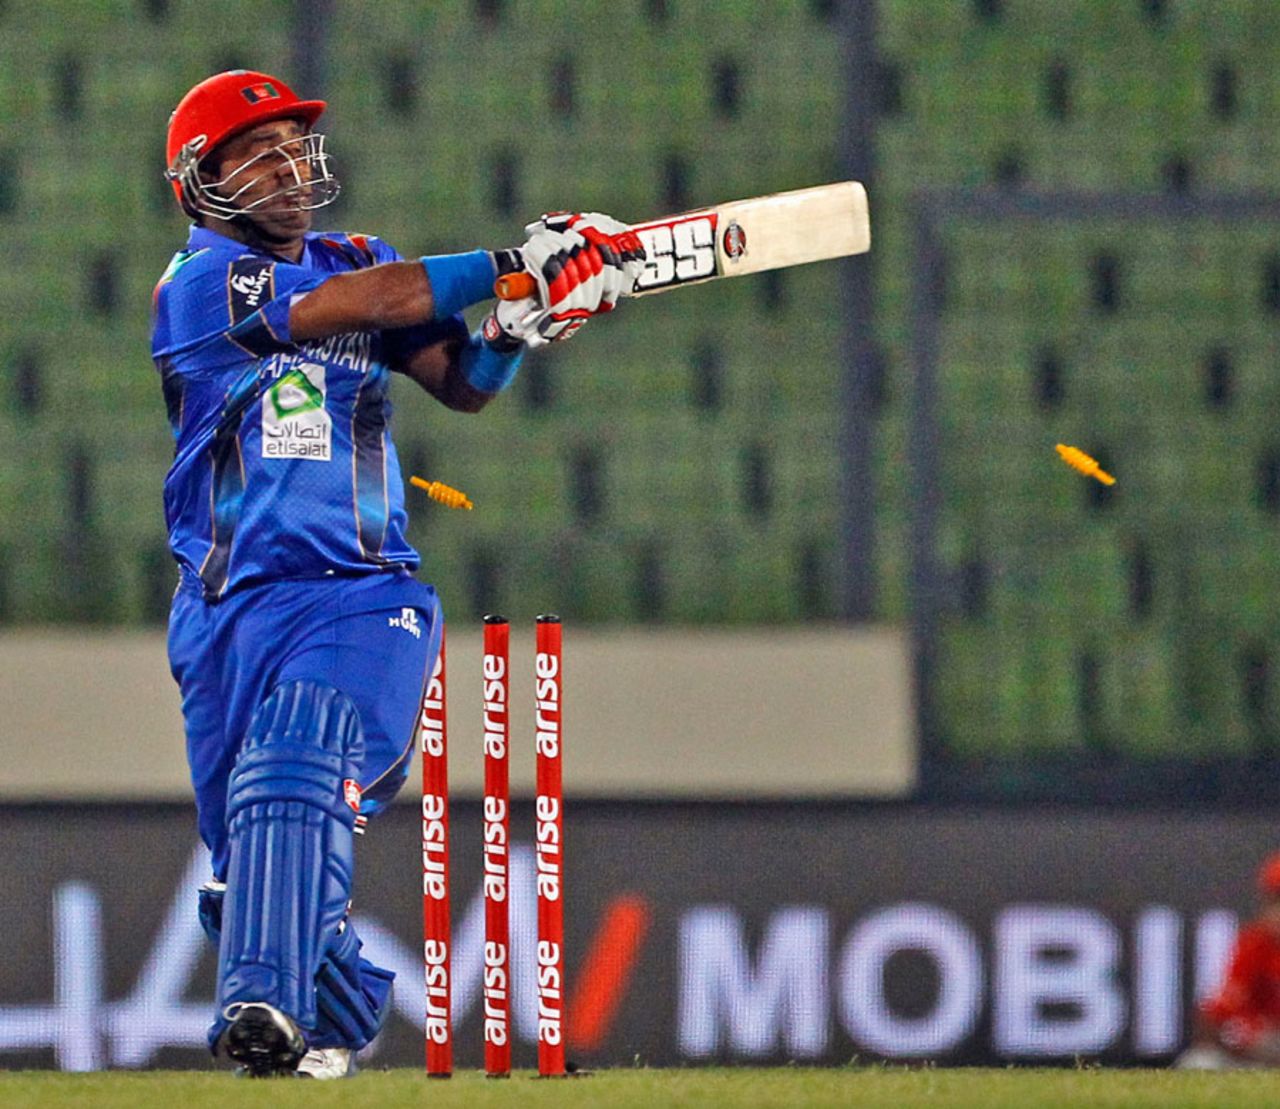 Mohammad Shahzad dragged the ball onto his stumps, Afghanistan v Sri Lanka, Asia Cup, Mirpur